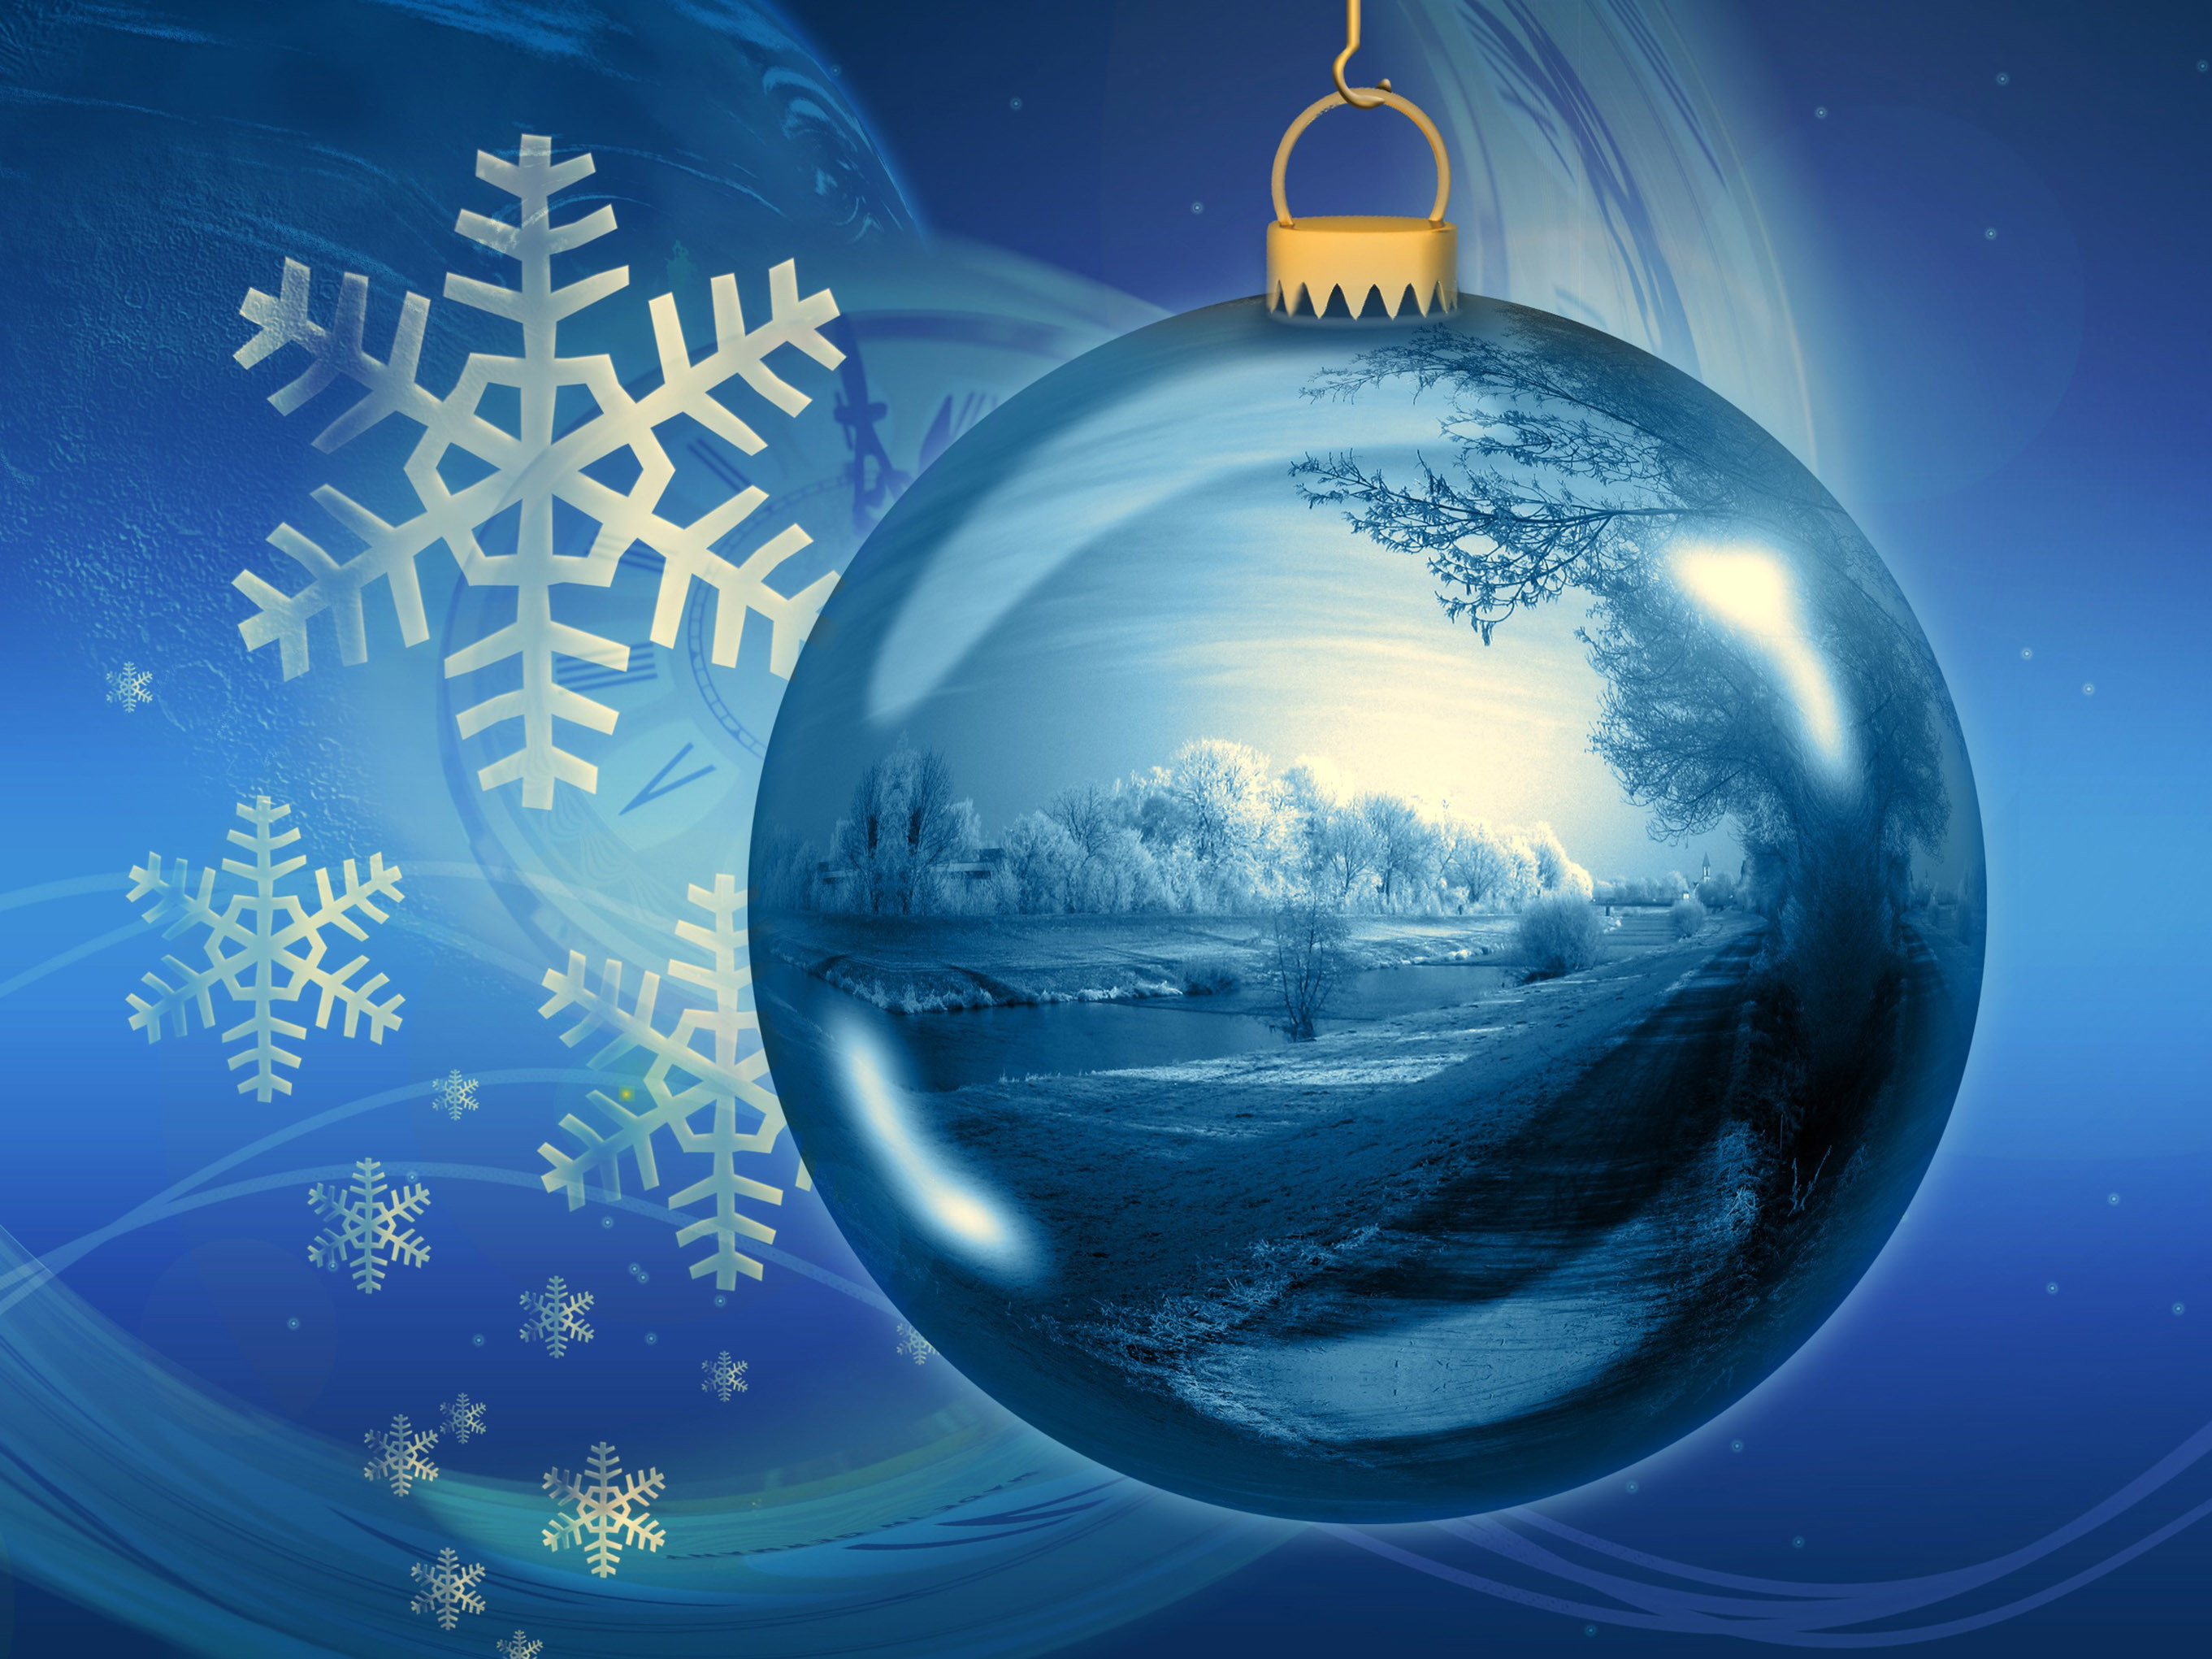 2722x2041 blue christmas wallpaper of a ball or bauble decoration